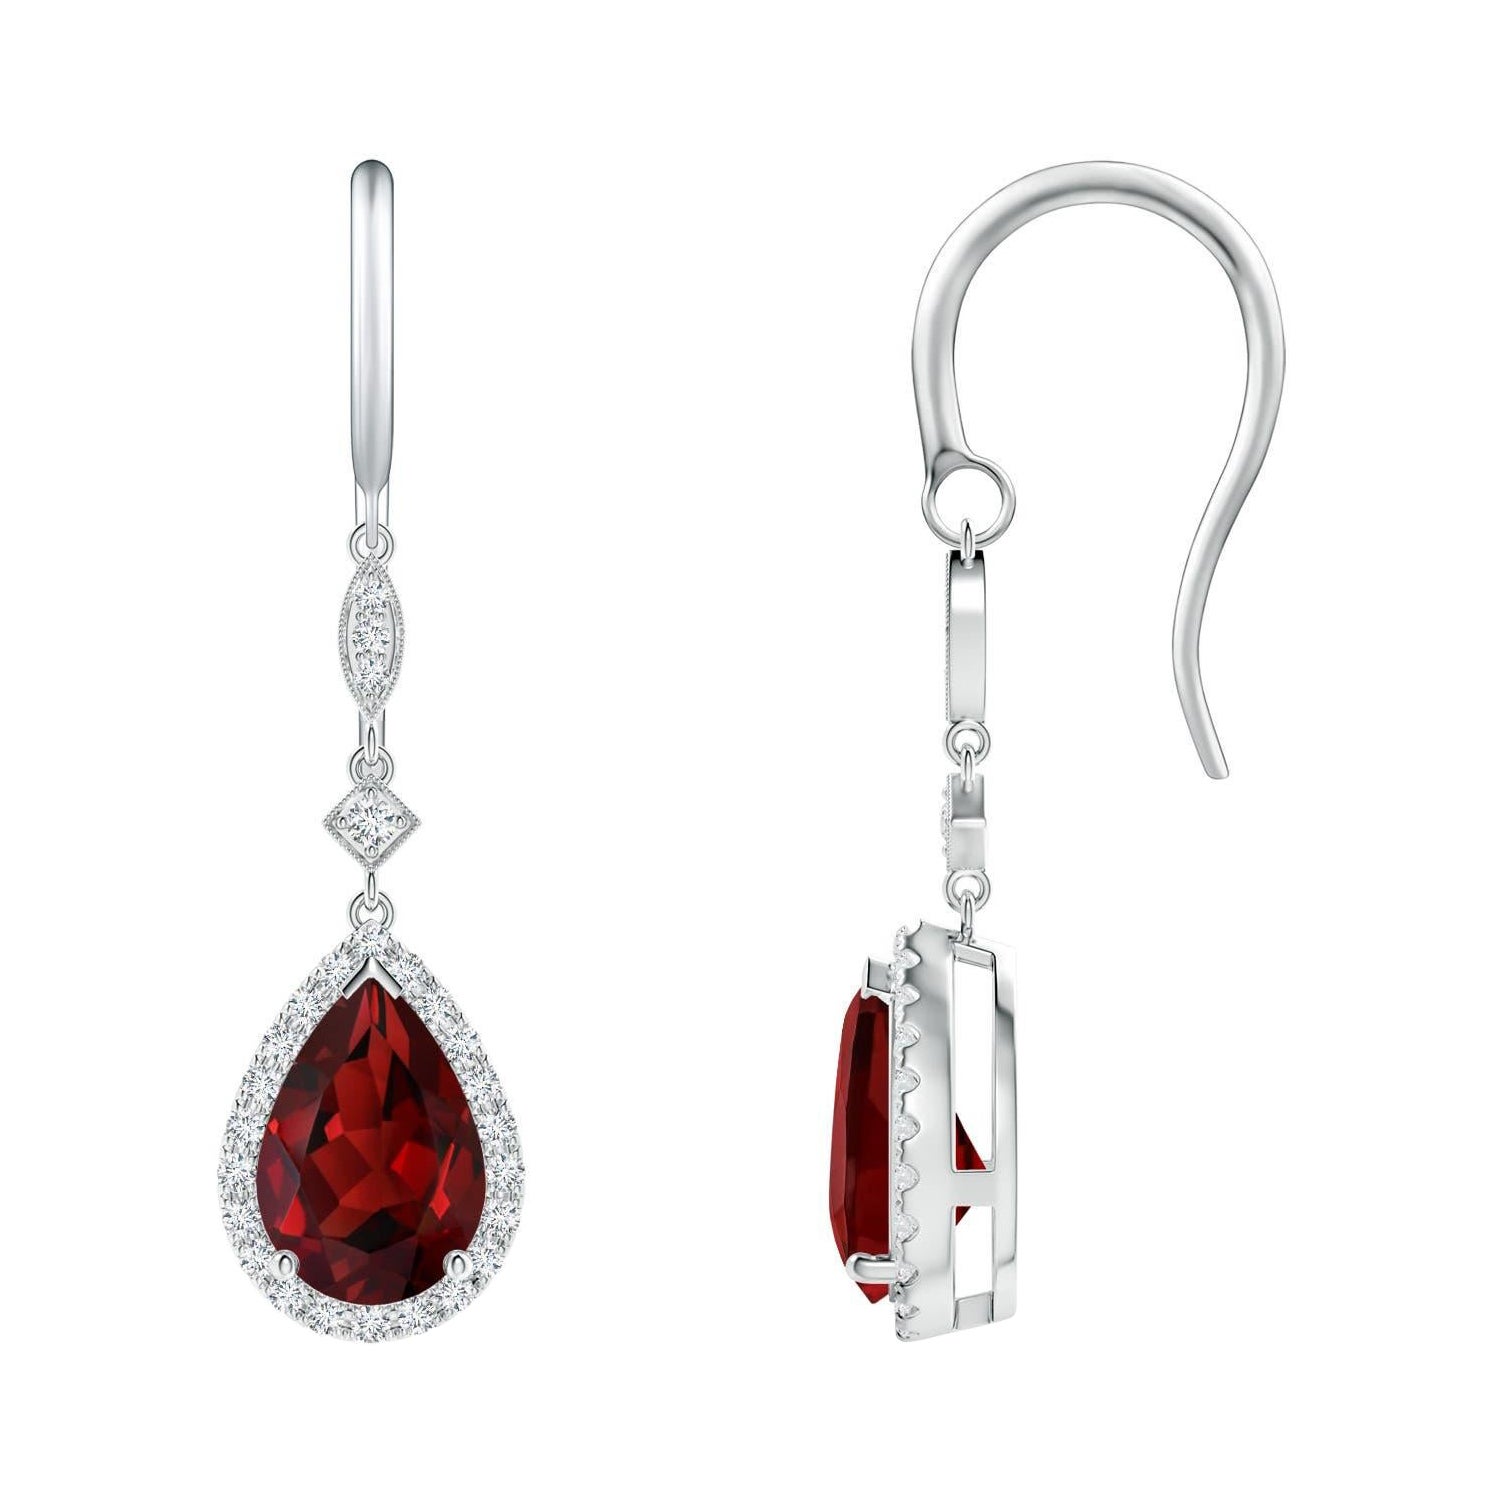 Natural Pear-Shaped 3ct Garnet Drop Earrings with Diamond in 14K White Gold For Sale